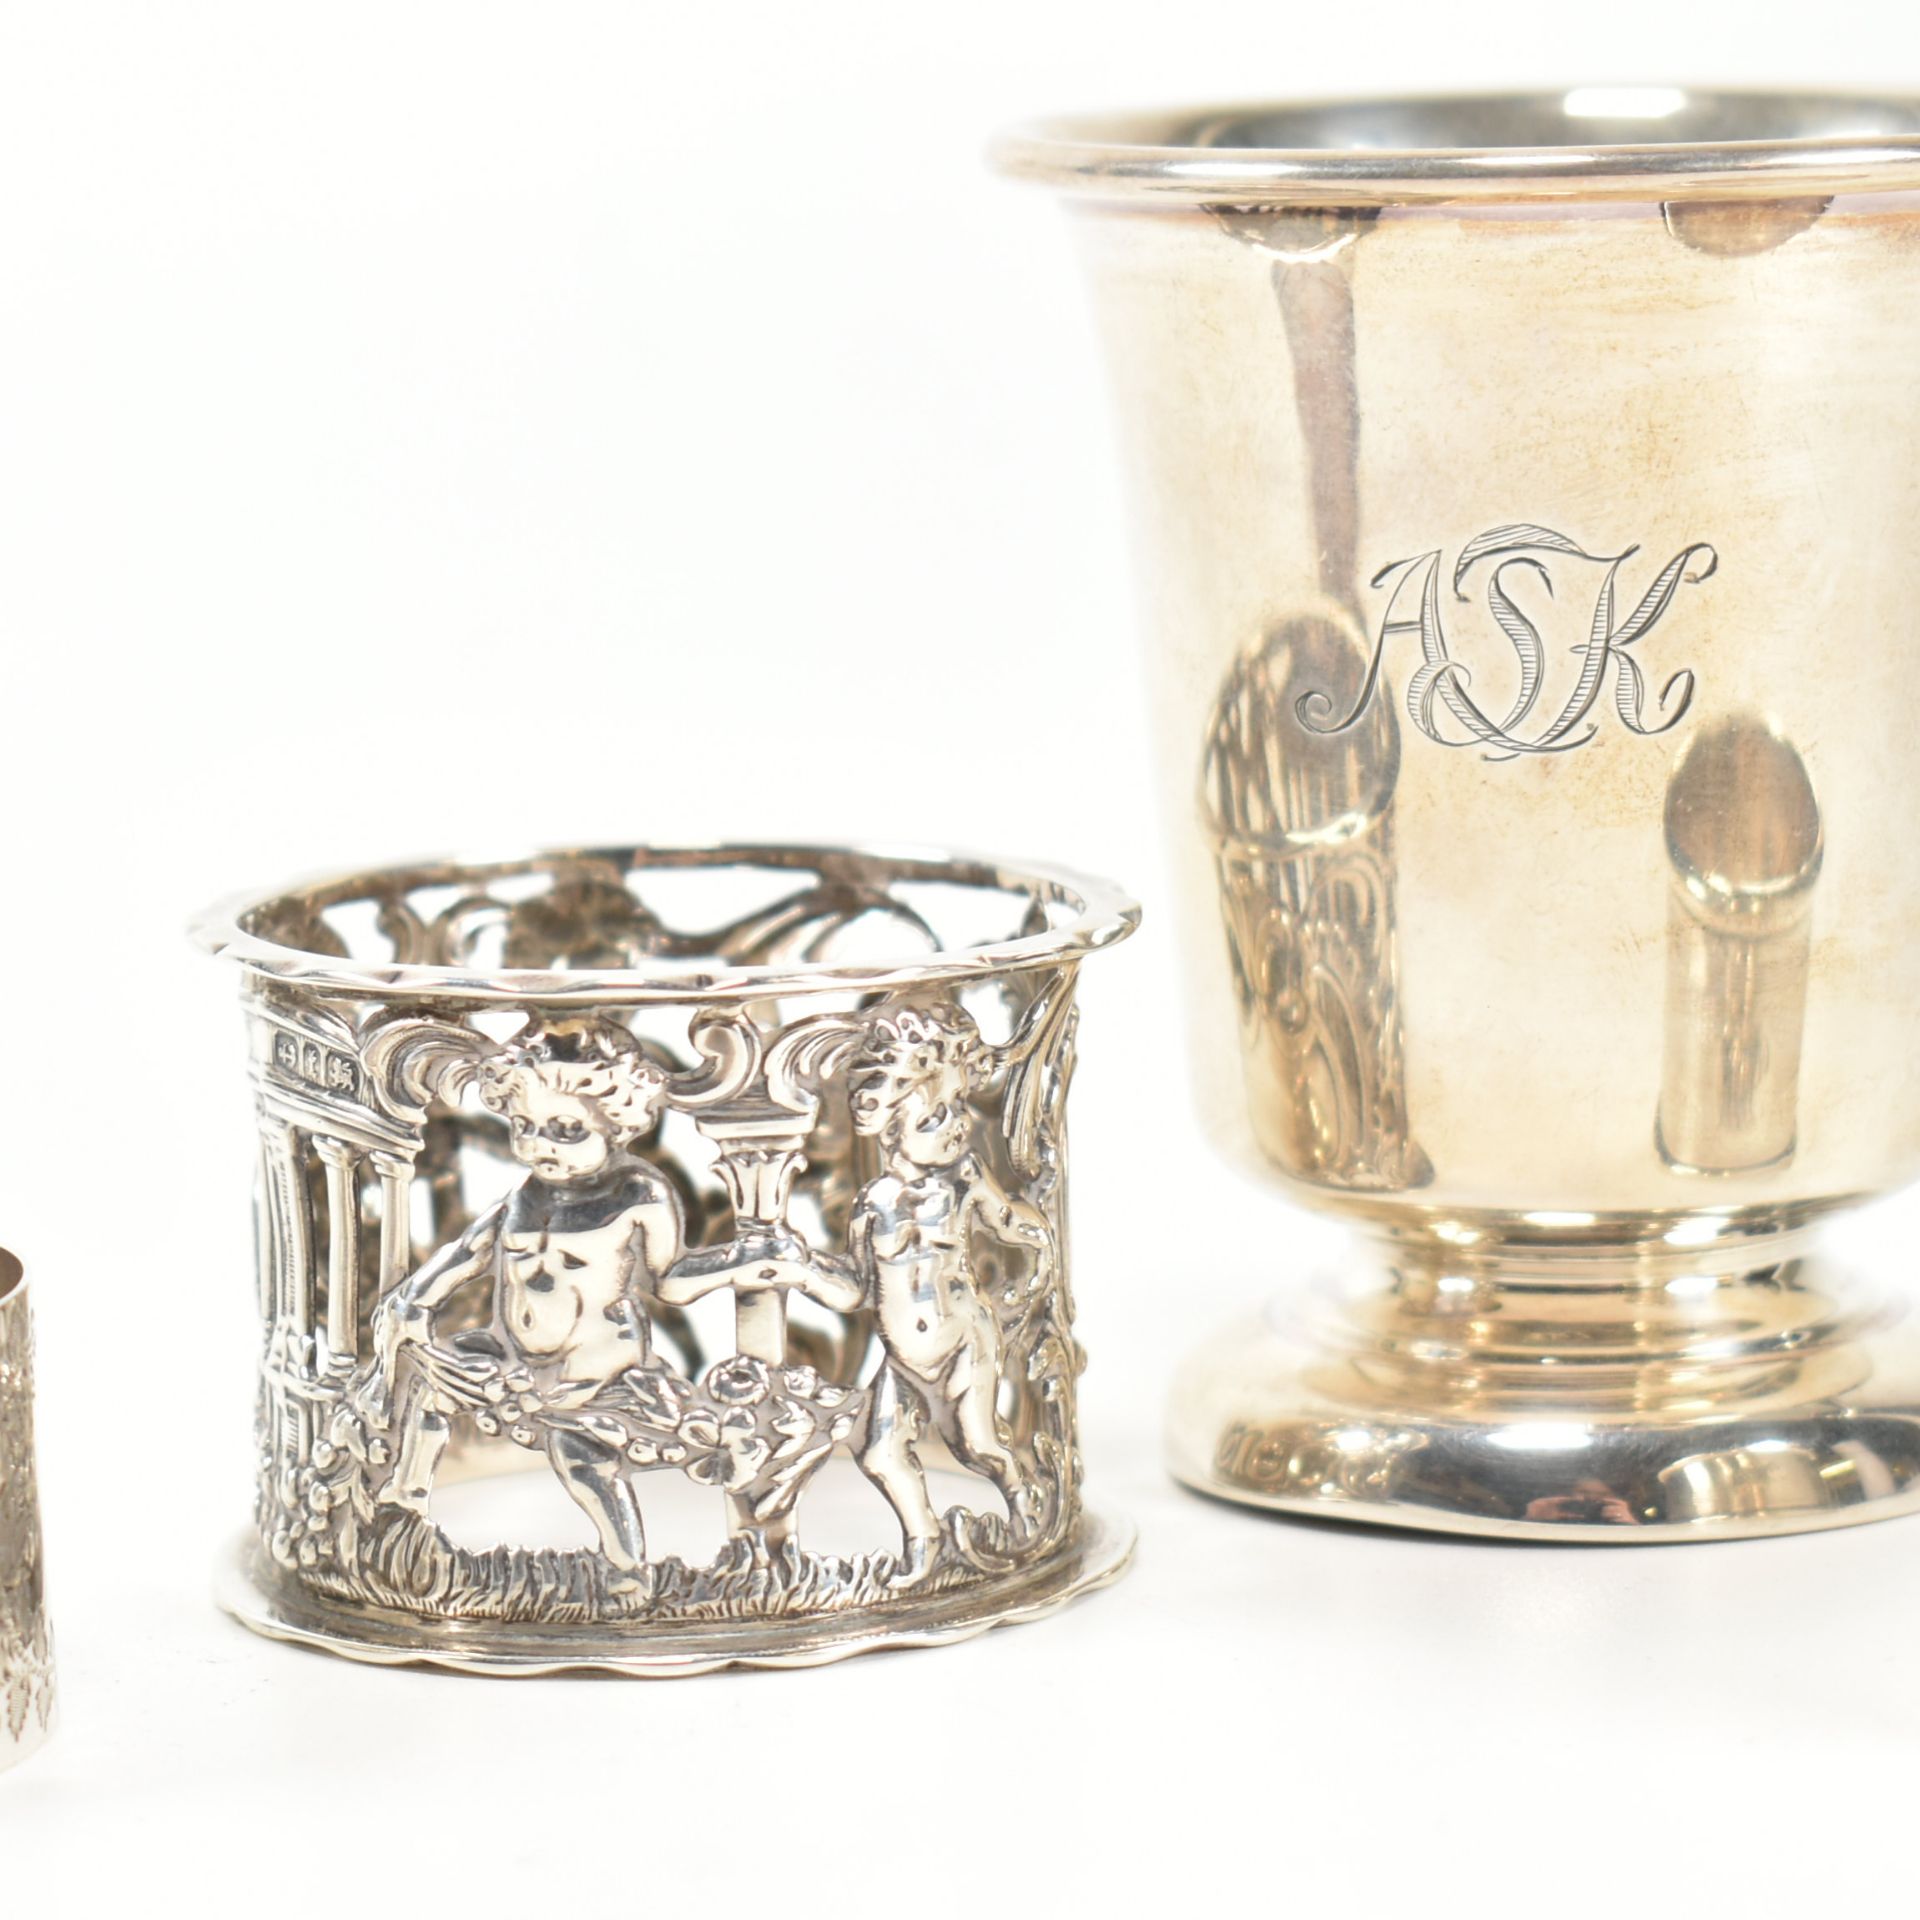 VICTORIAN & LATER HALLMARKED SILVER ITEMS CUP & NAPKIN RINGS - Image 5 of 8